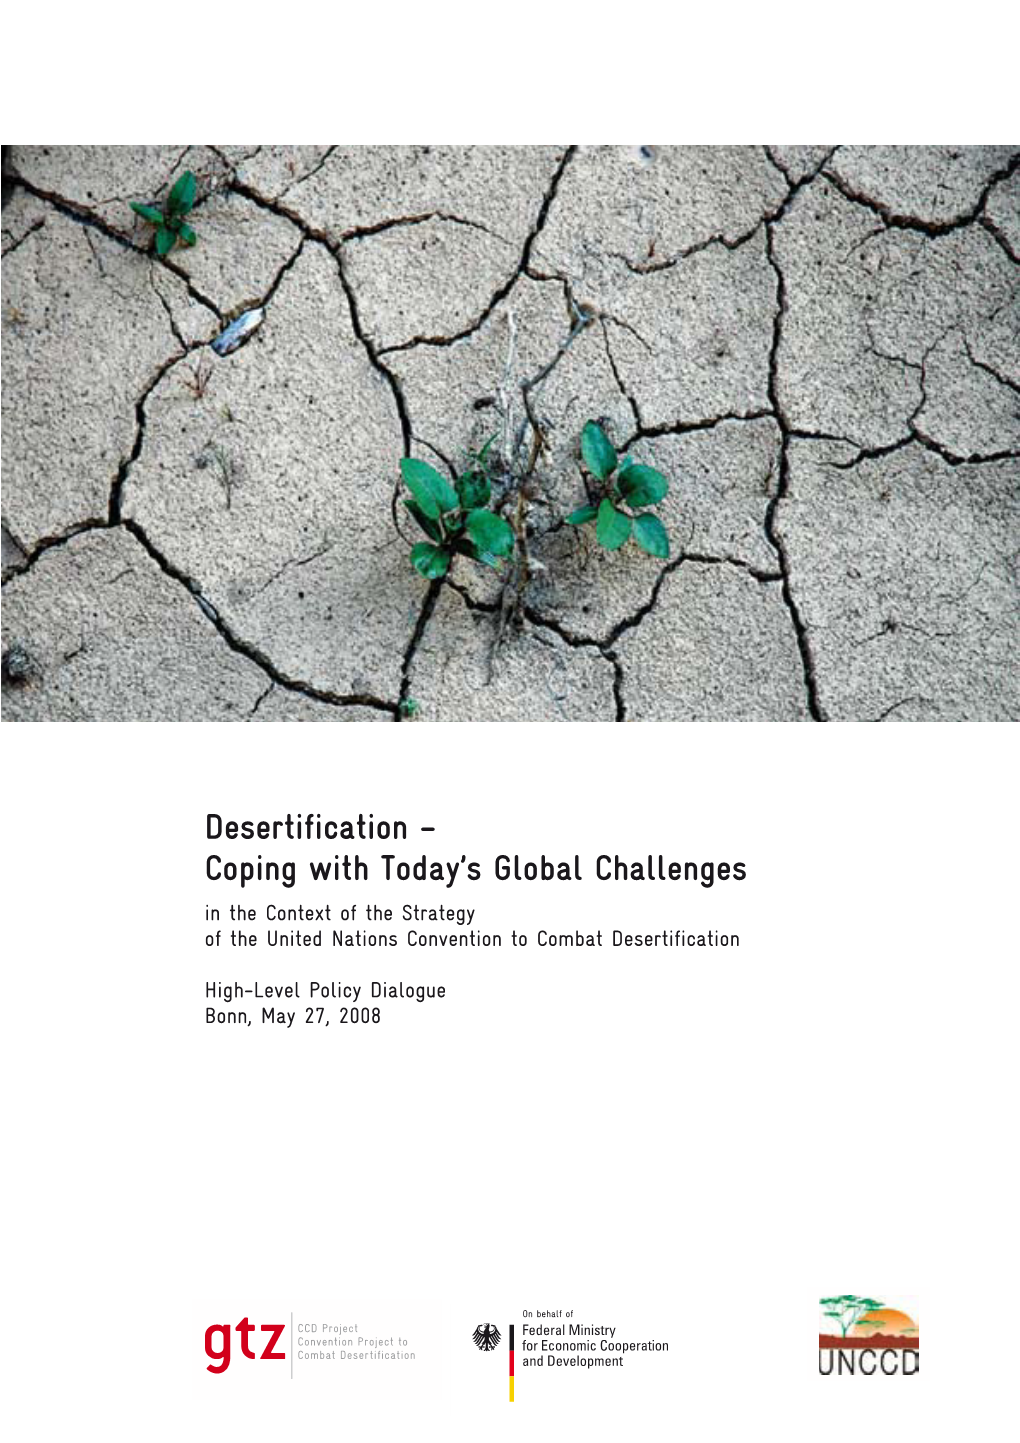 Desertification – Coping with Today’S Global Challenges in the Context of the Strategy of the United Nations Convention to Combat Desertification